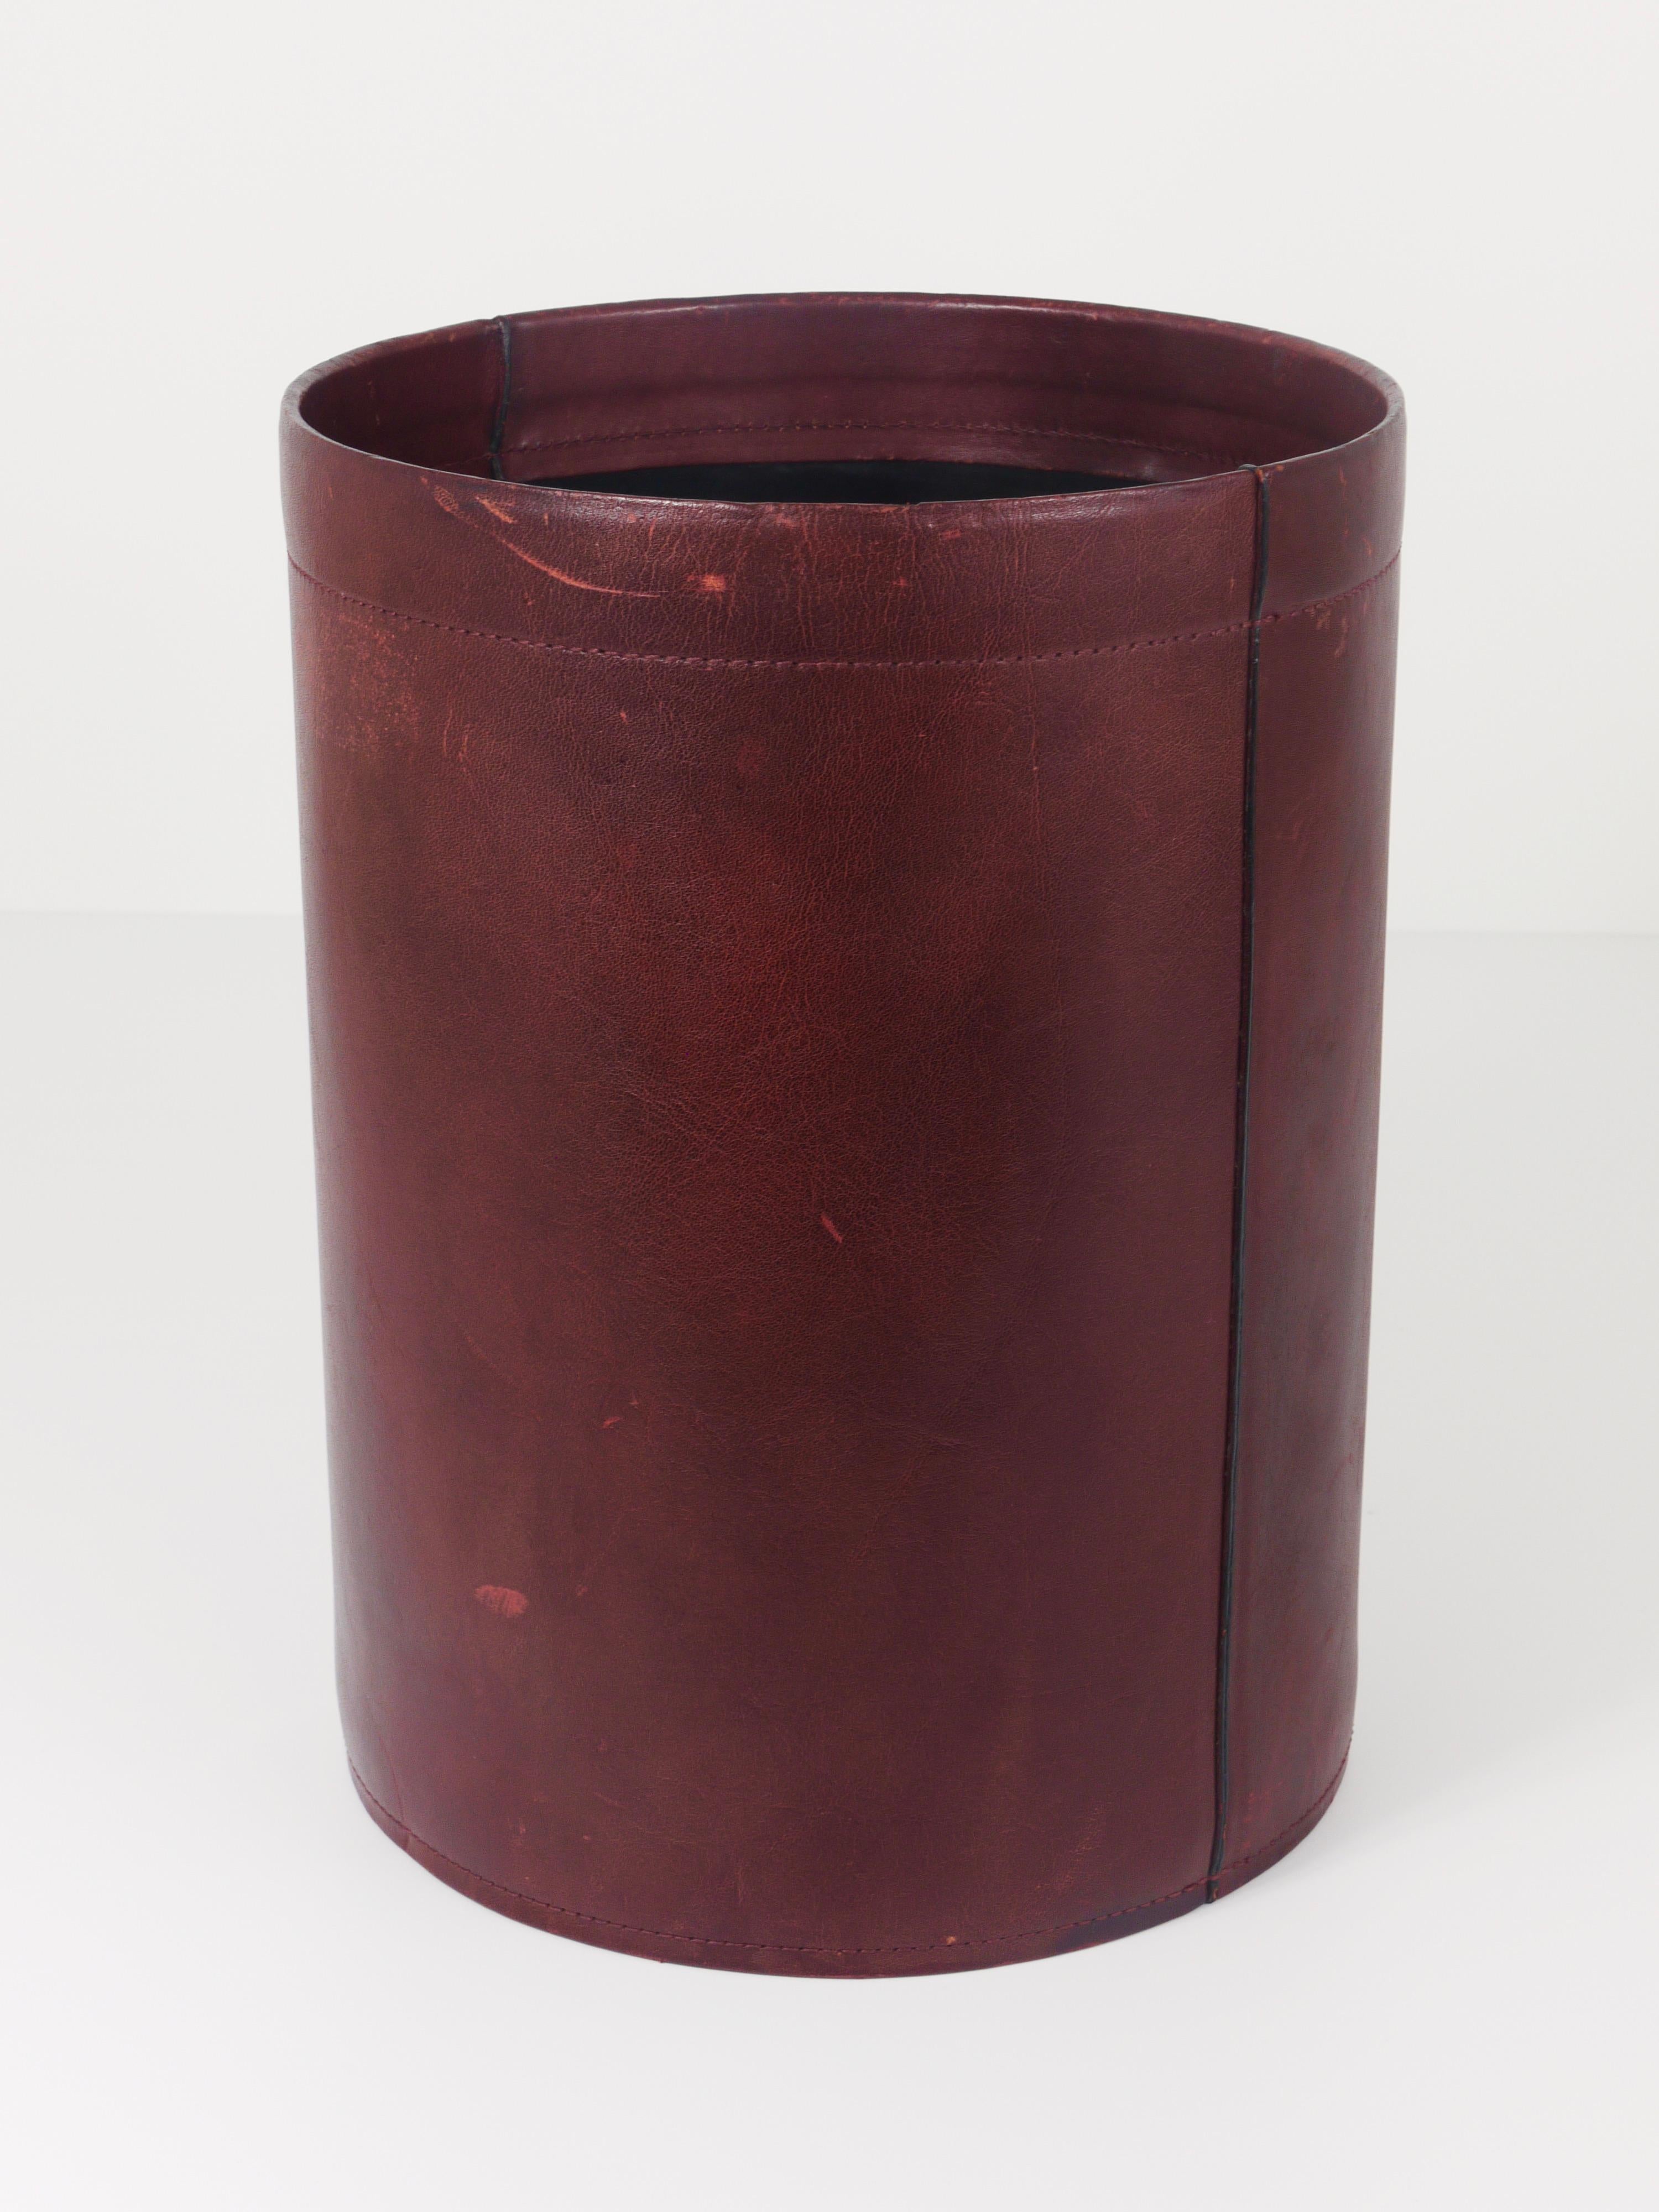 French Jacques Adnet Style Red Brown Leather Wastepaper Basket Bin, France, 1970s